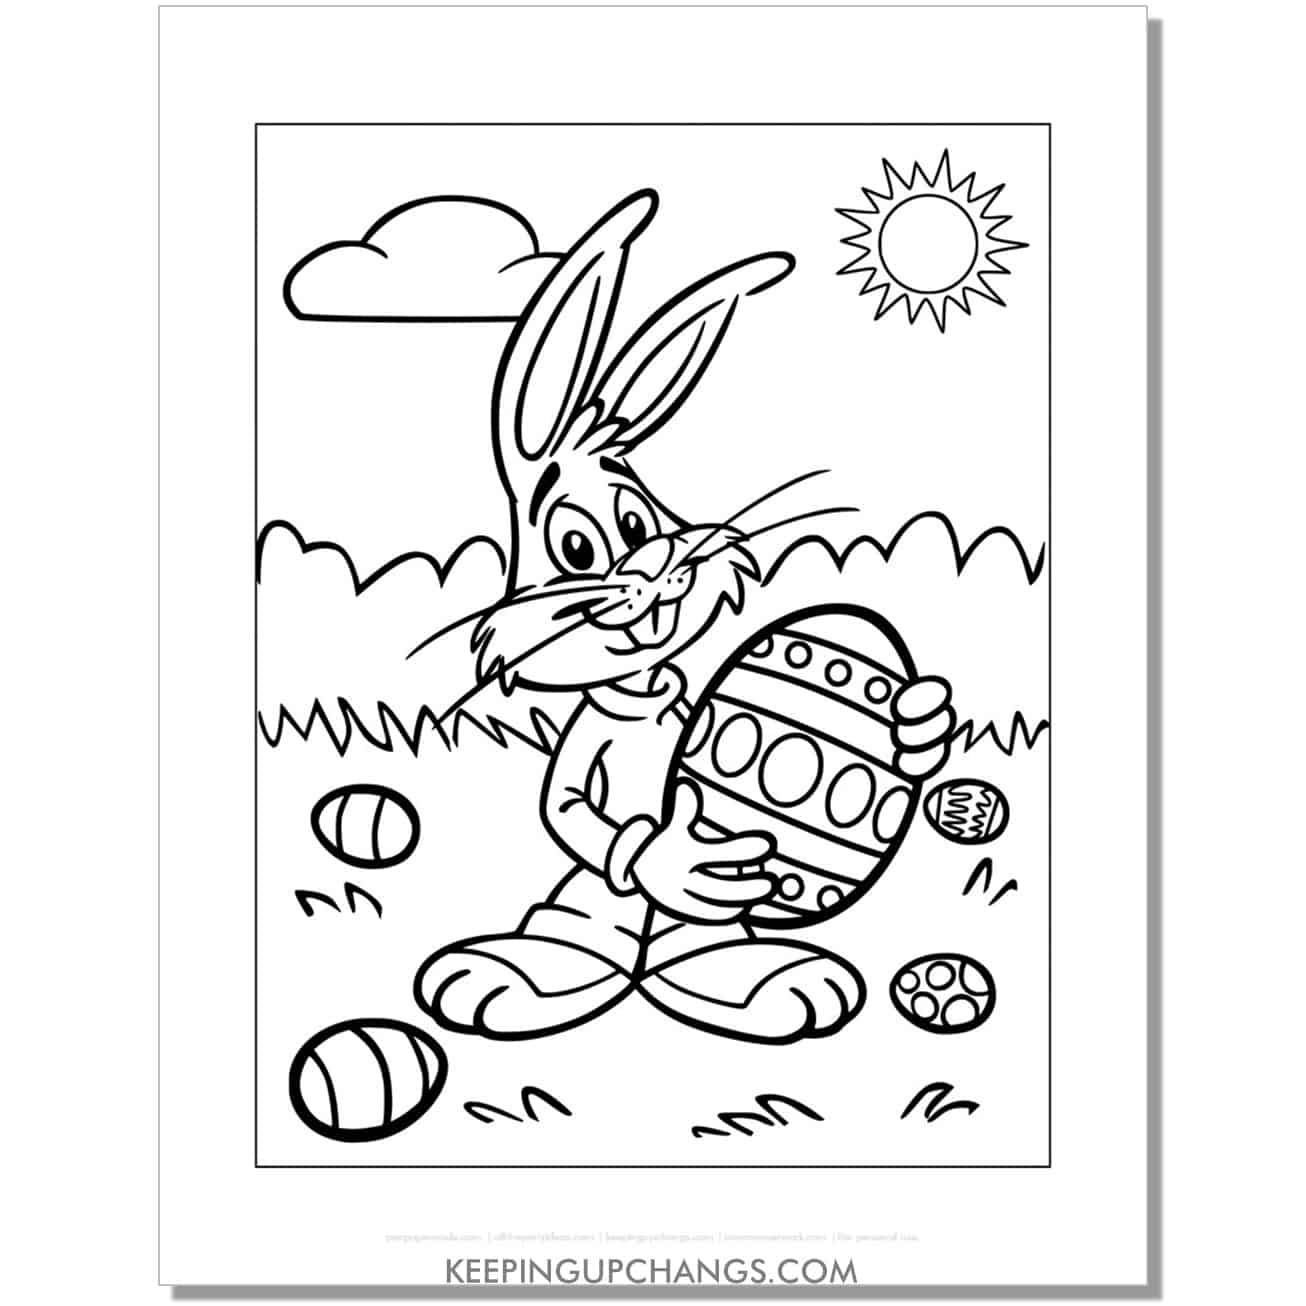 funny easter bunny holding egg coloring page, sheet.